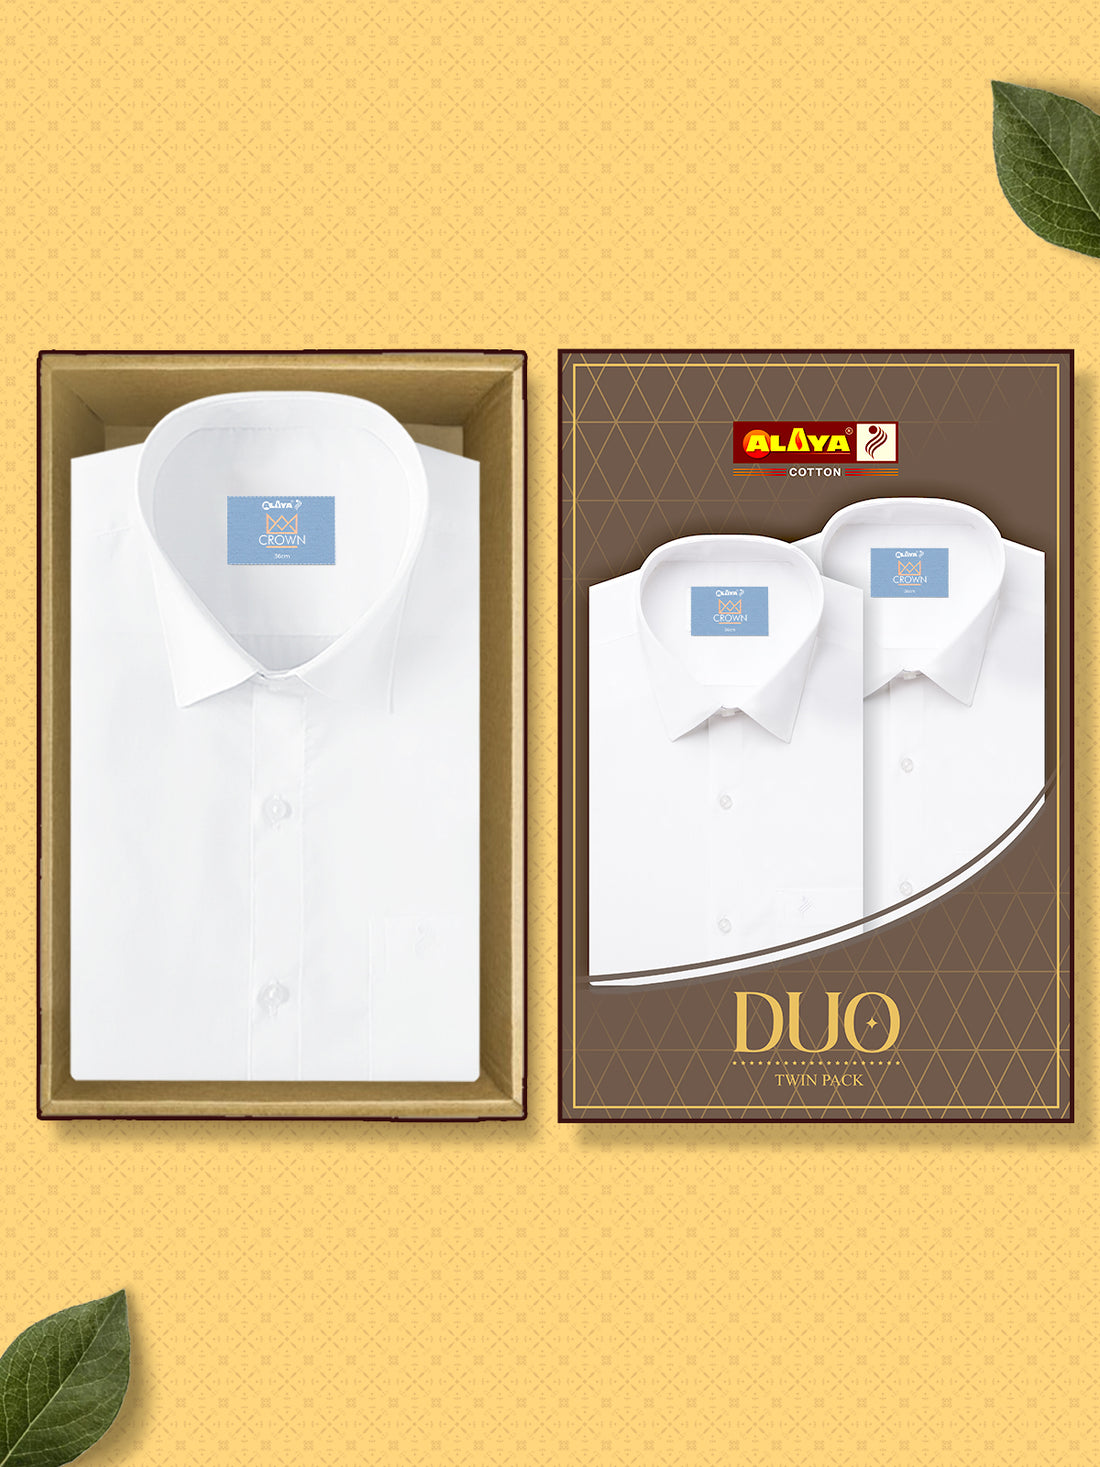 Crown Cotton White Shirt Regular Fit - Duo Twin Pack